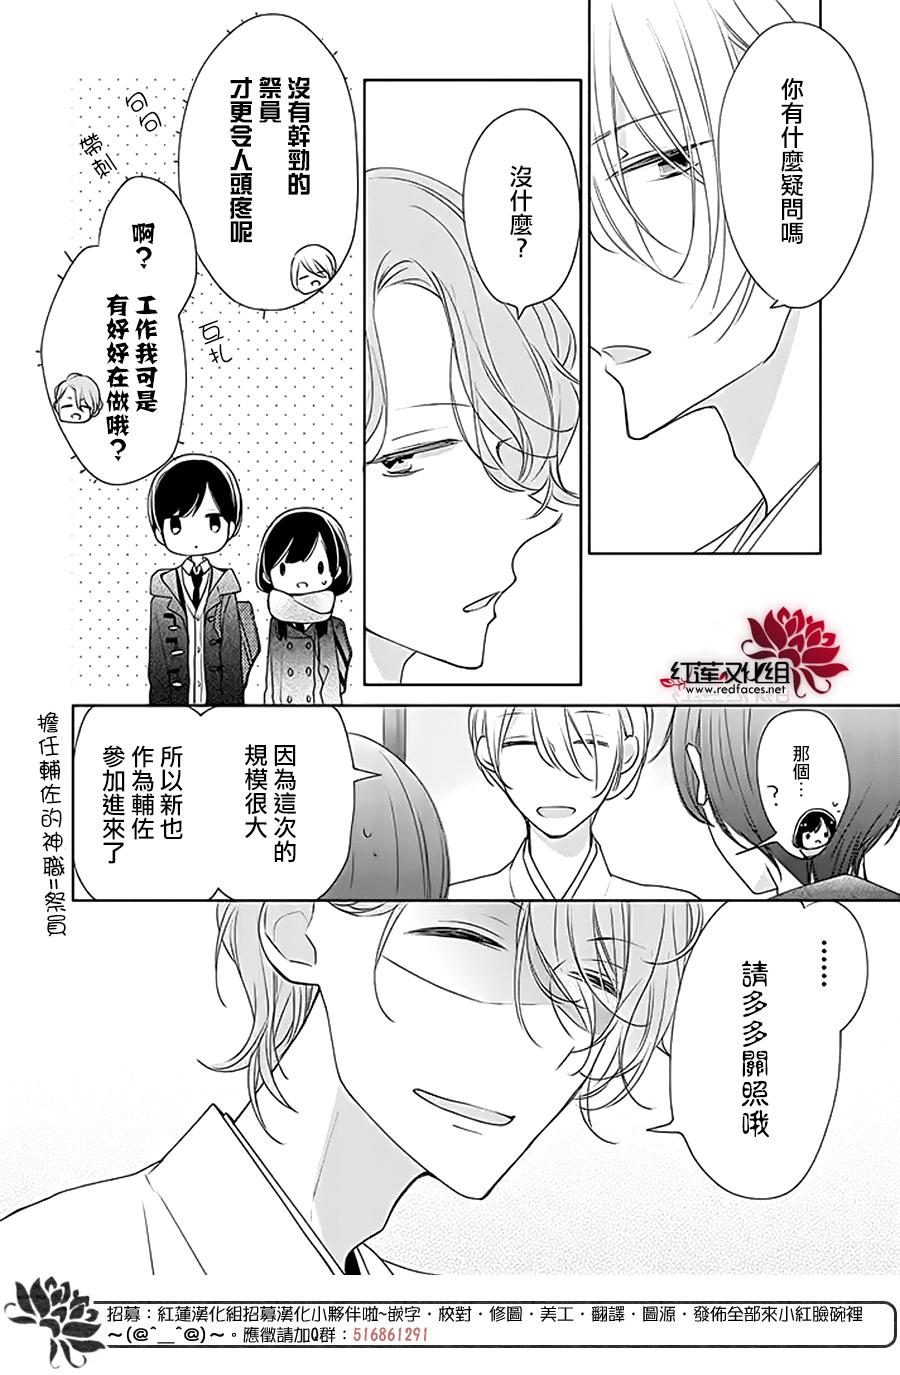 If given a second chance - 28話 - 4